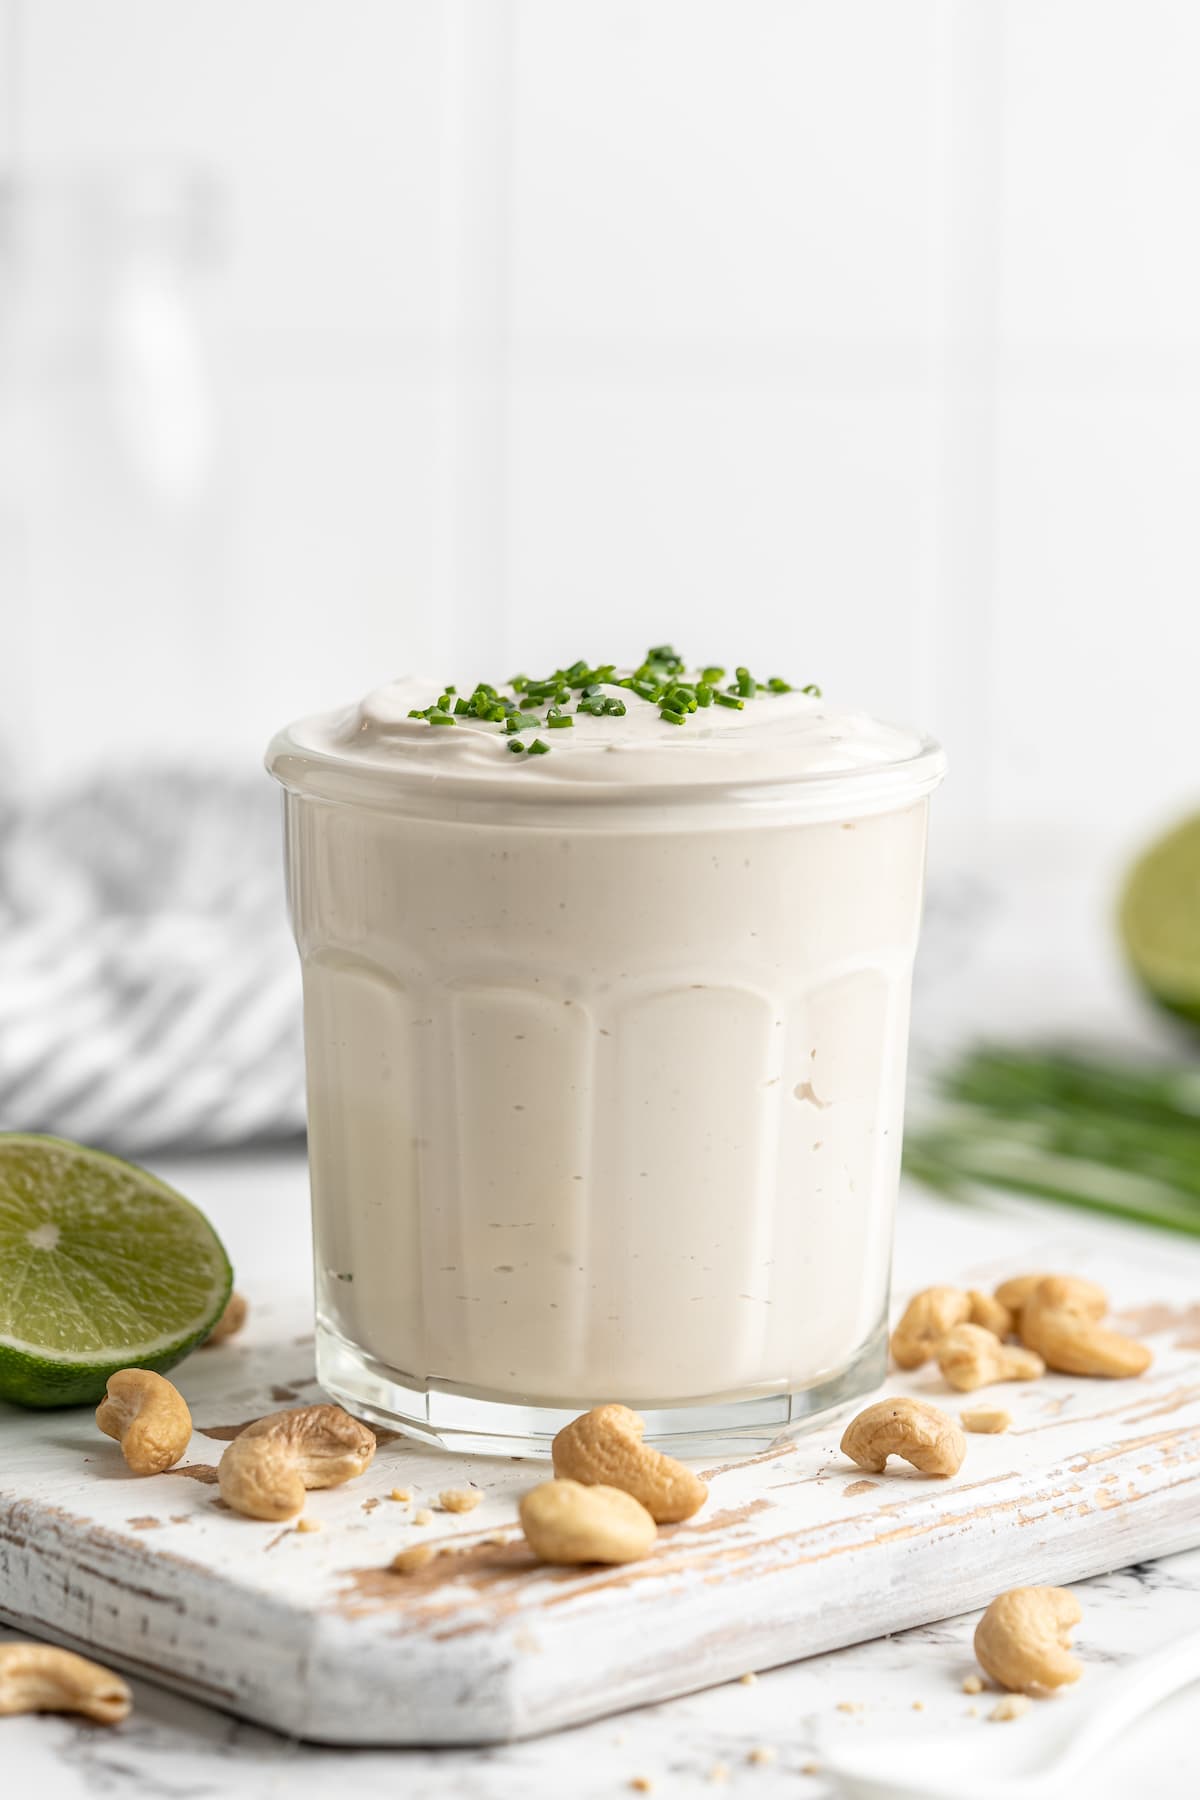 Vegan sour cream in jar with chives on top